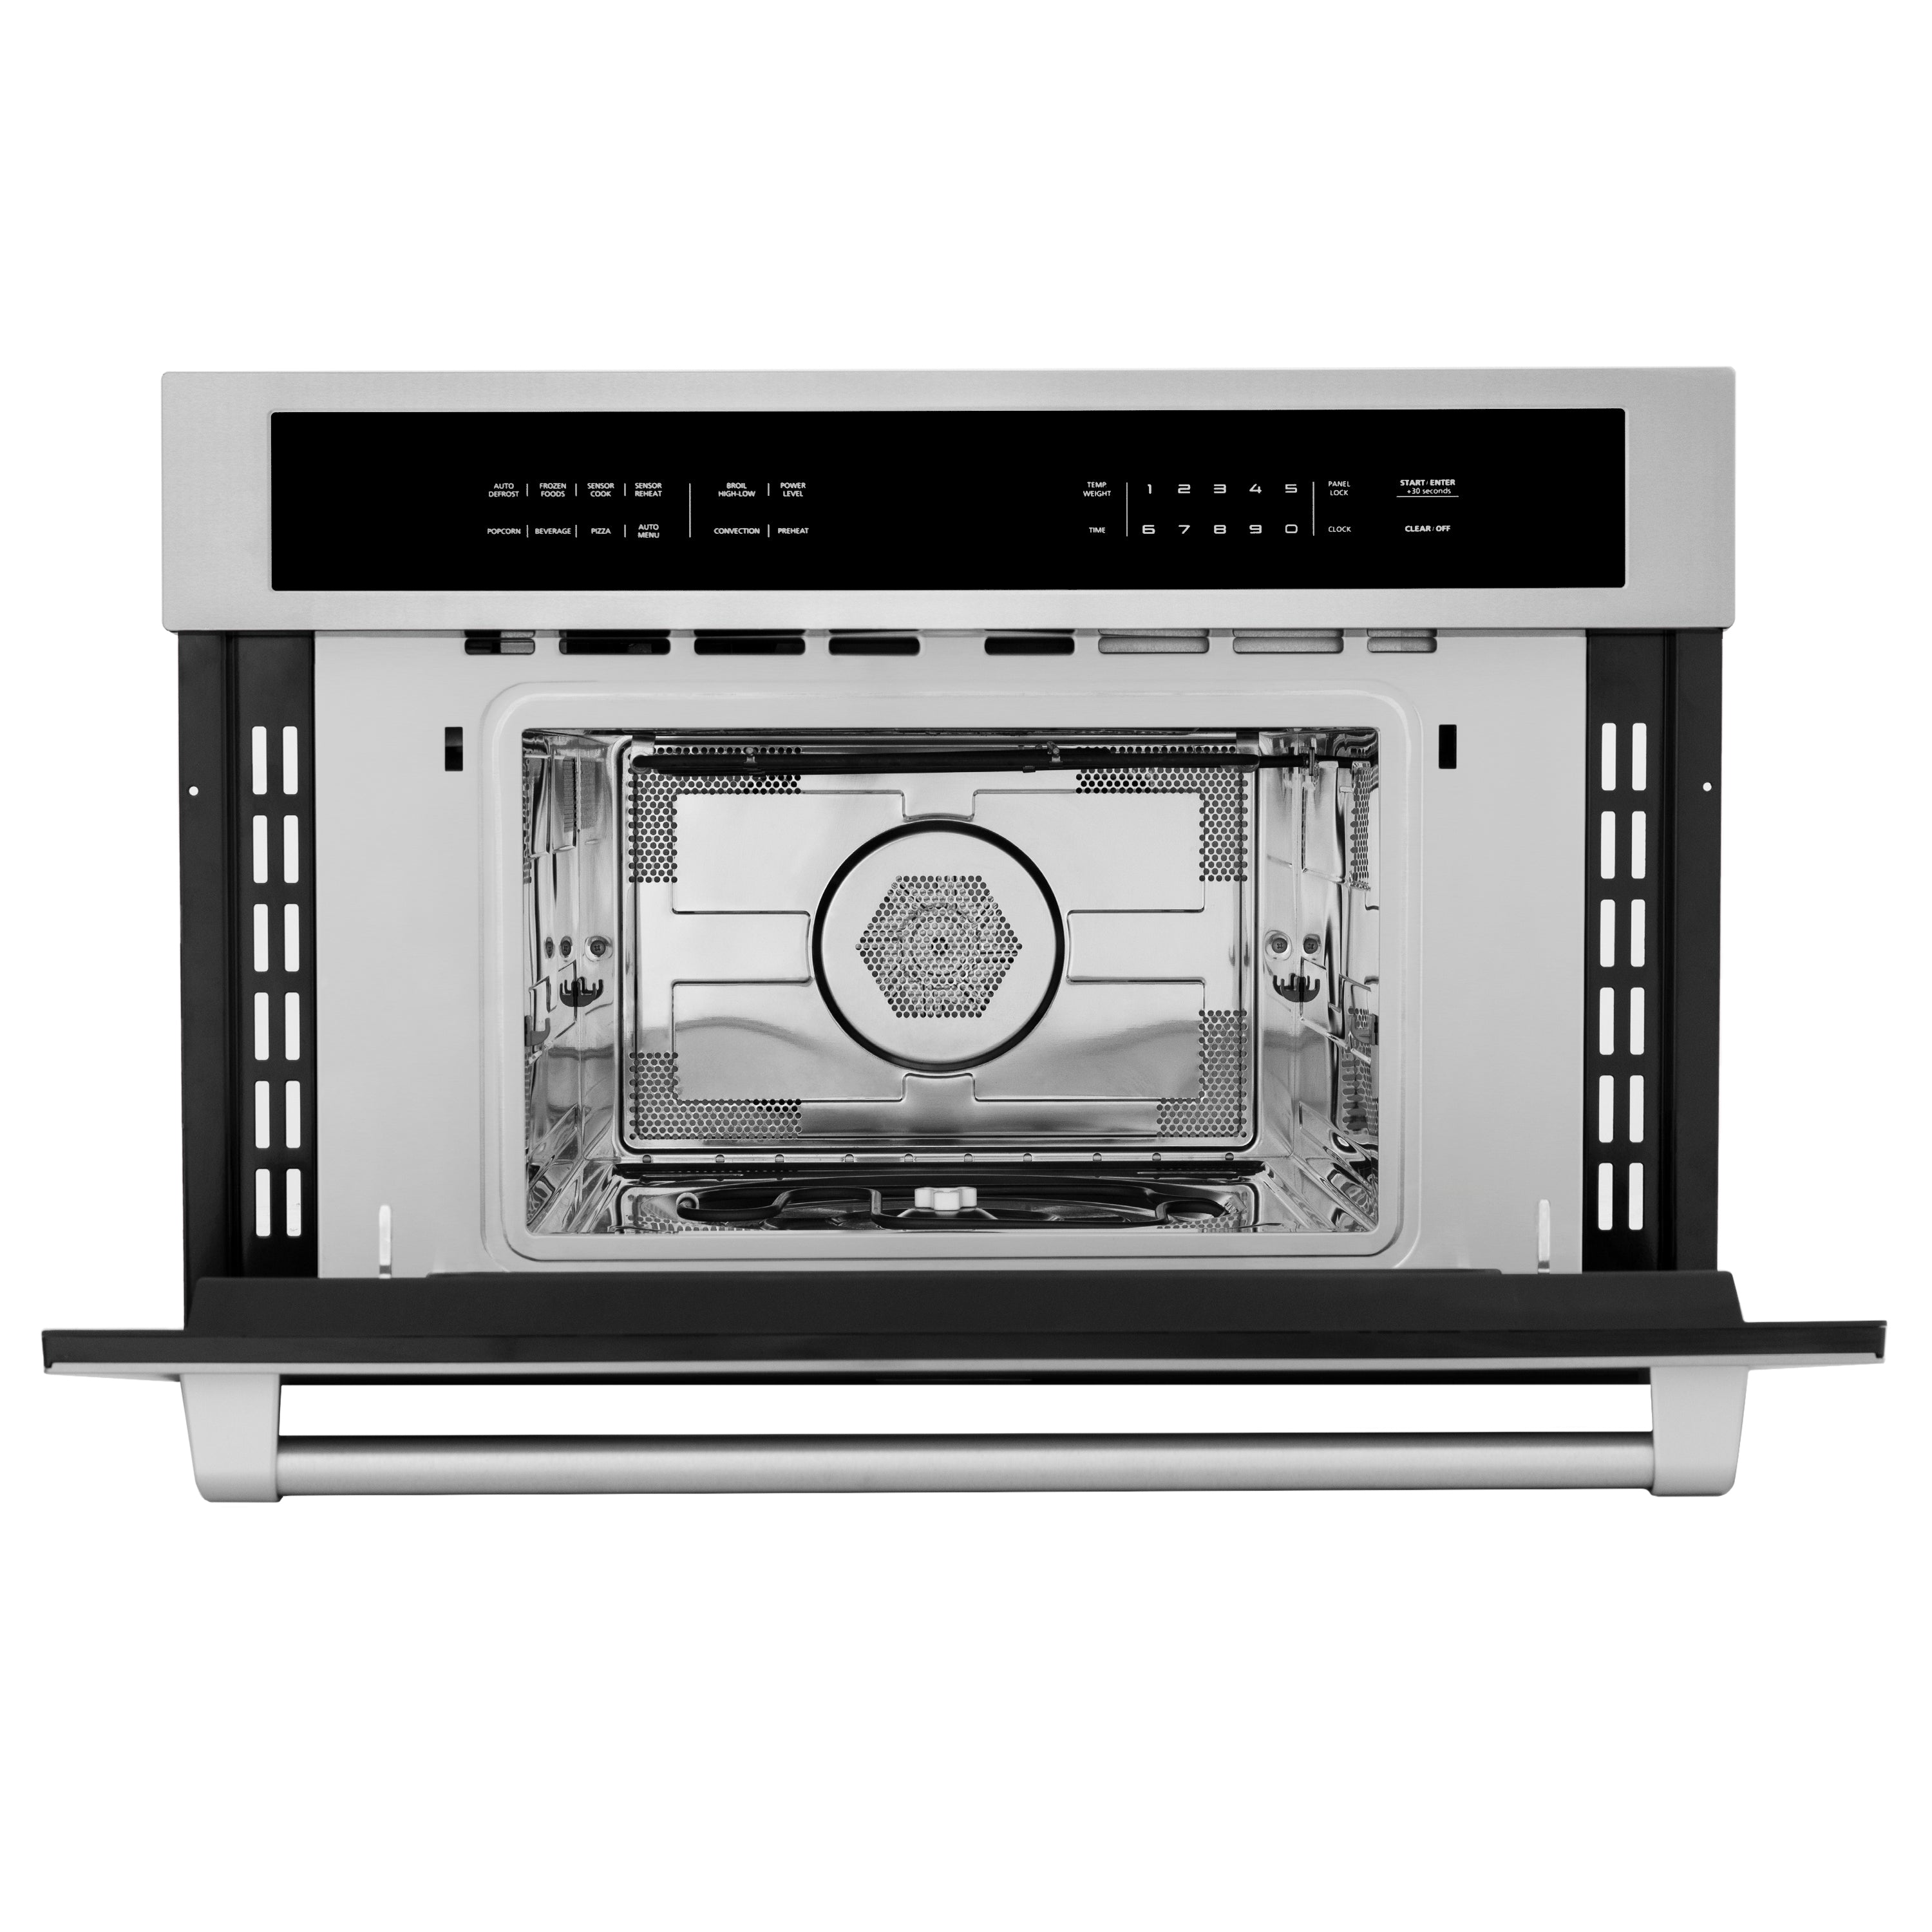 ZLINE 30” 1.6 cu ft. Built-in Convection Microwave Oven in Stainless Steel with Speed and Sensor Cooking